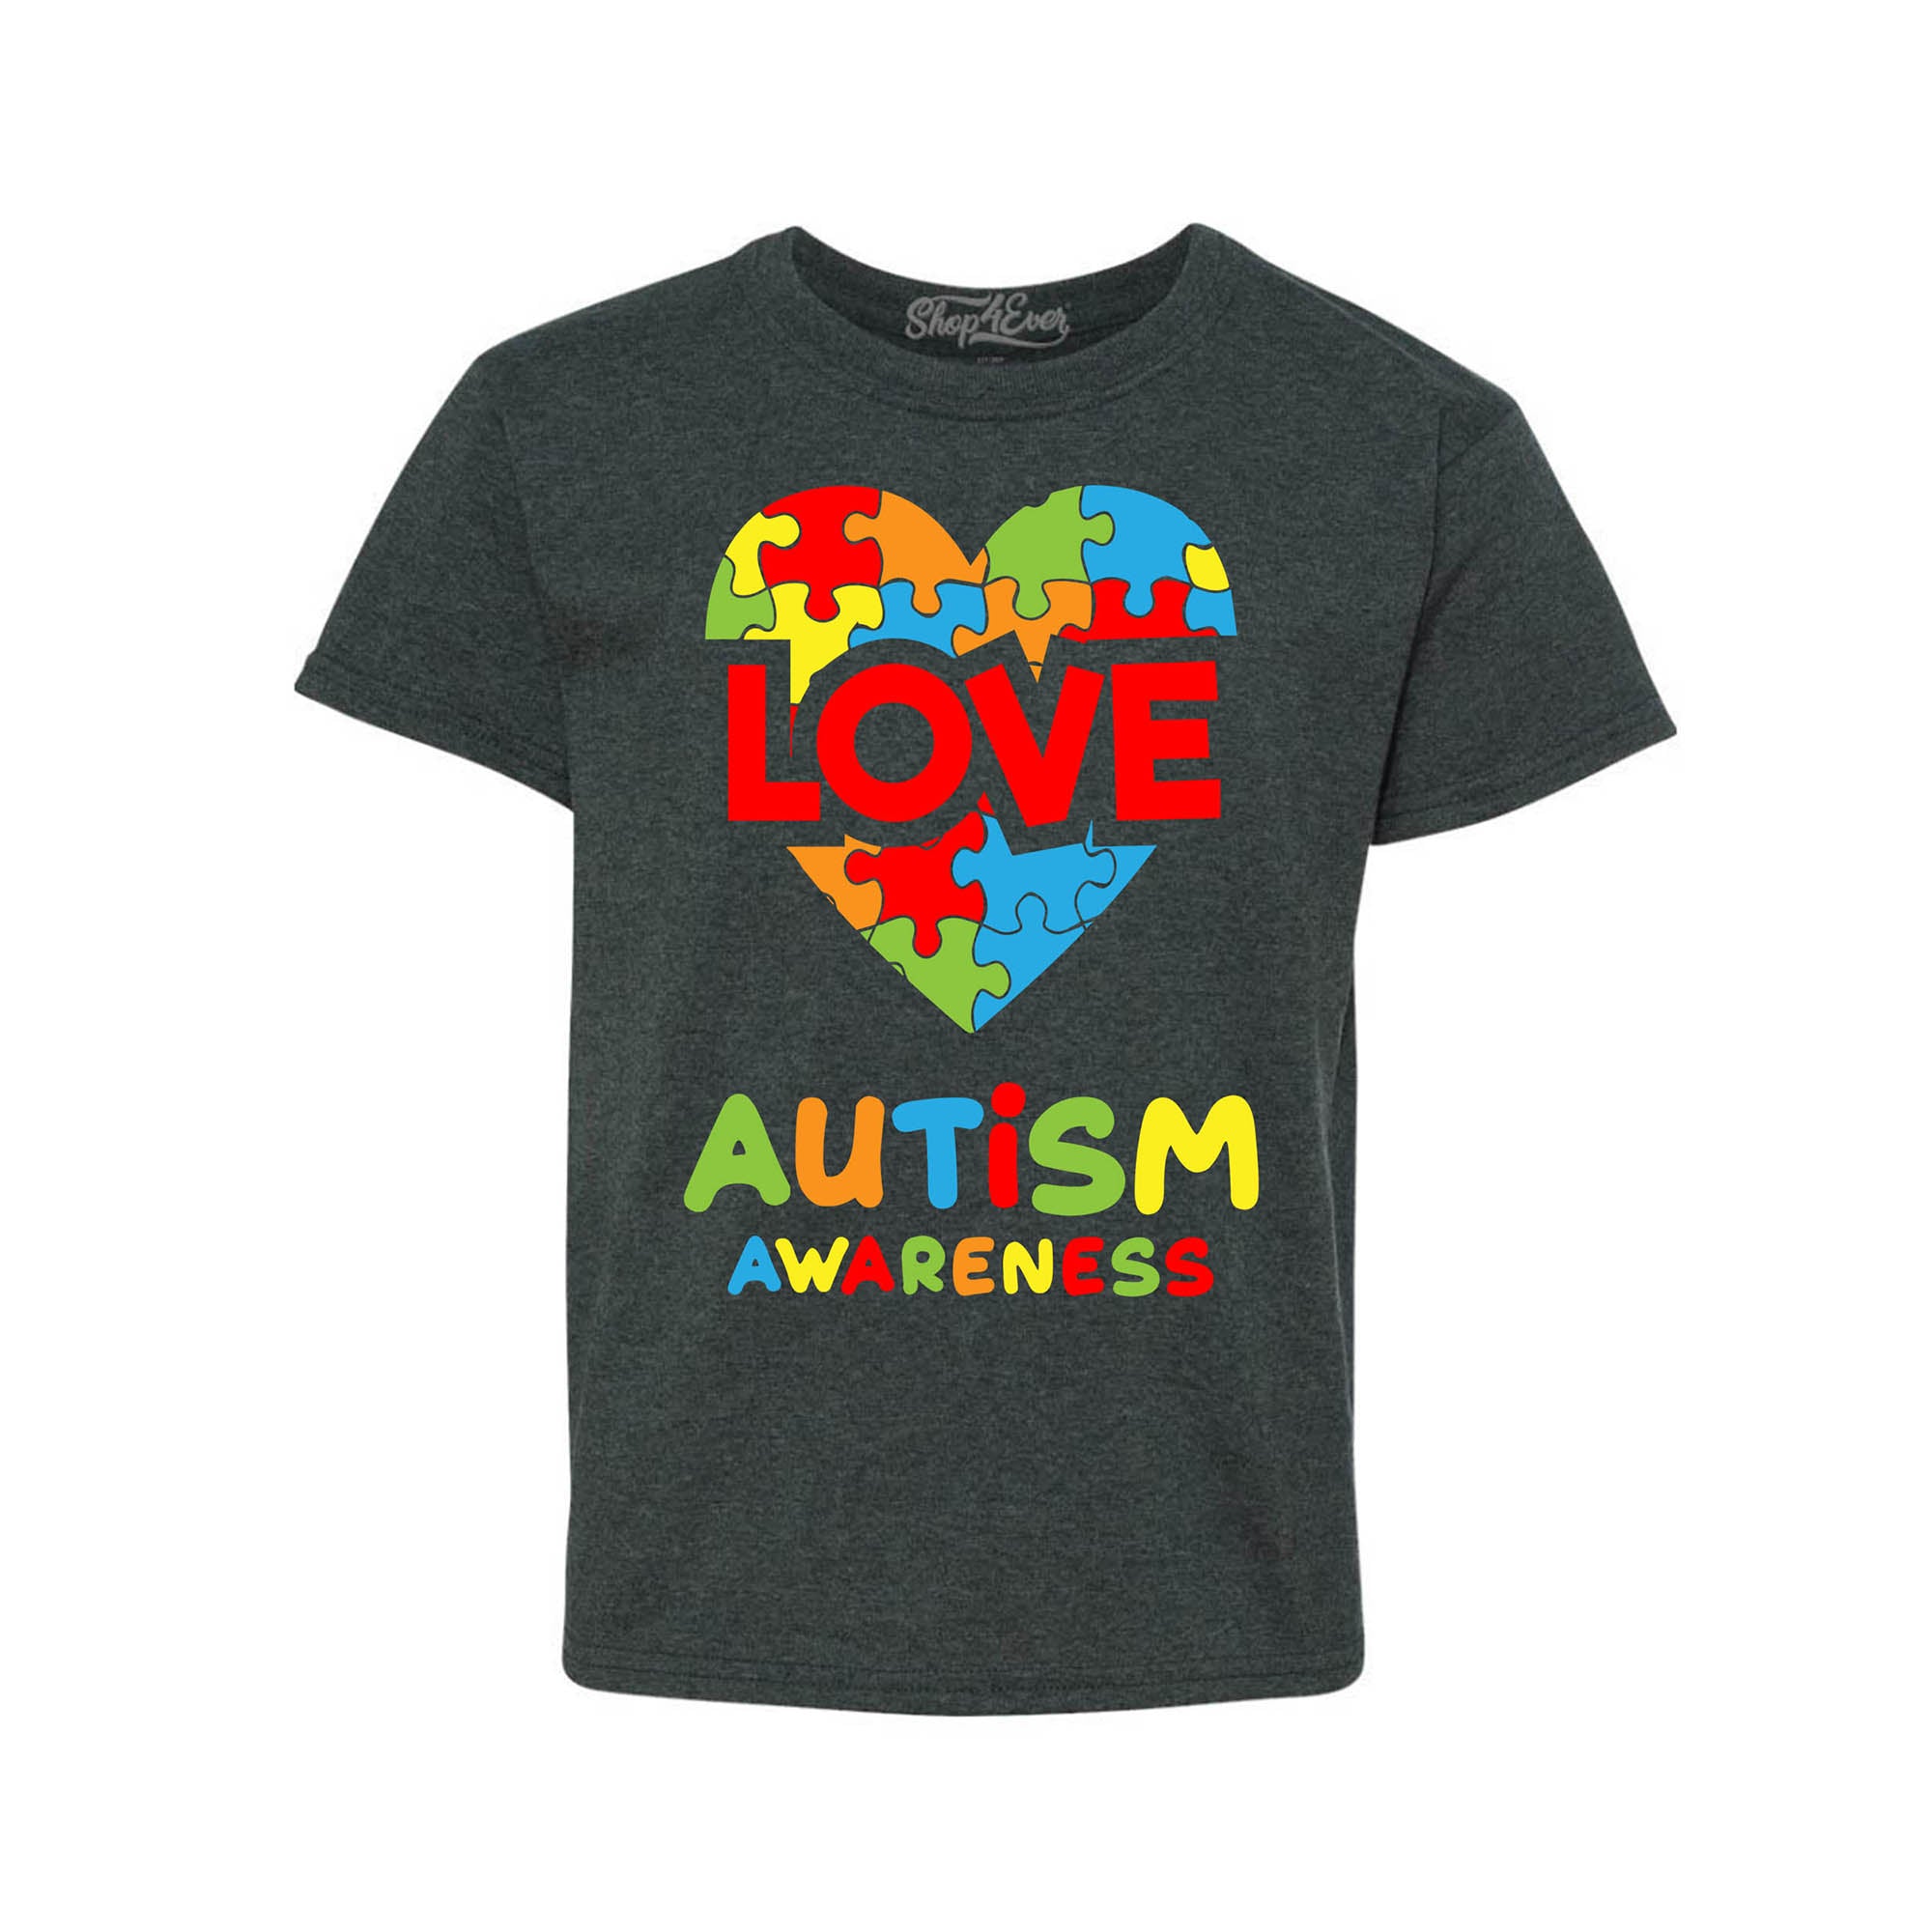 Autism Awareness Love with Puzzled Heart Child's T-Shirt Kids Tee